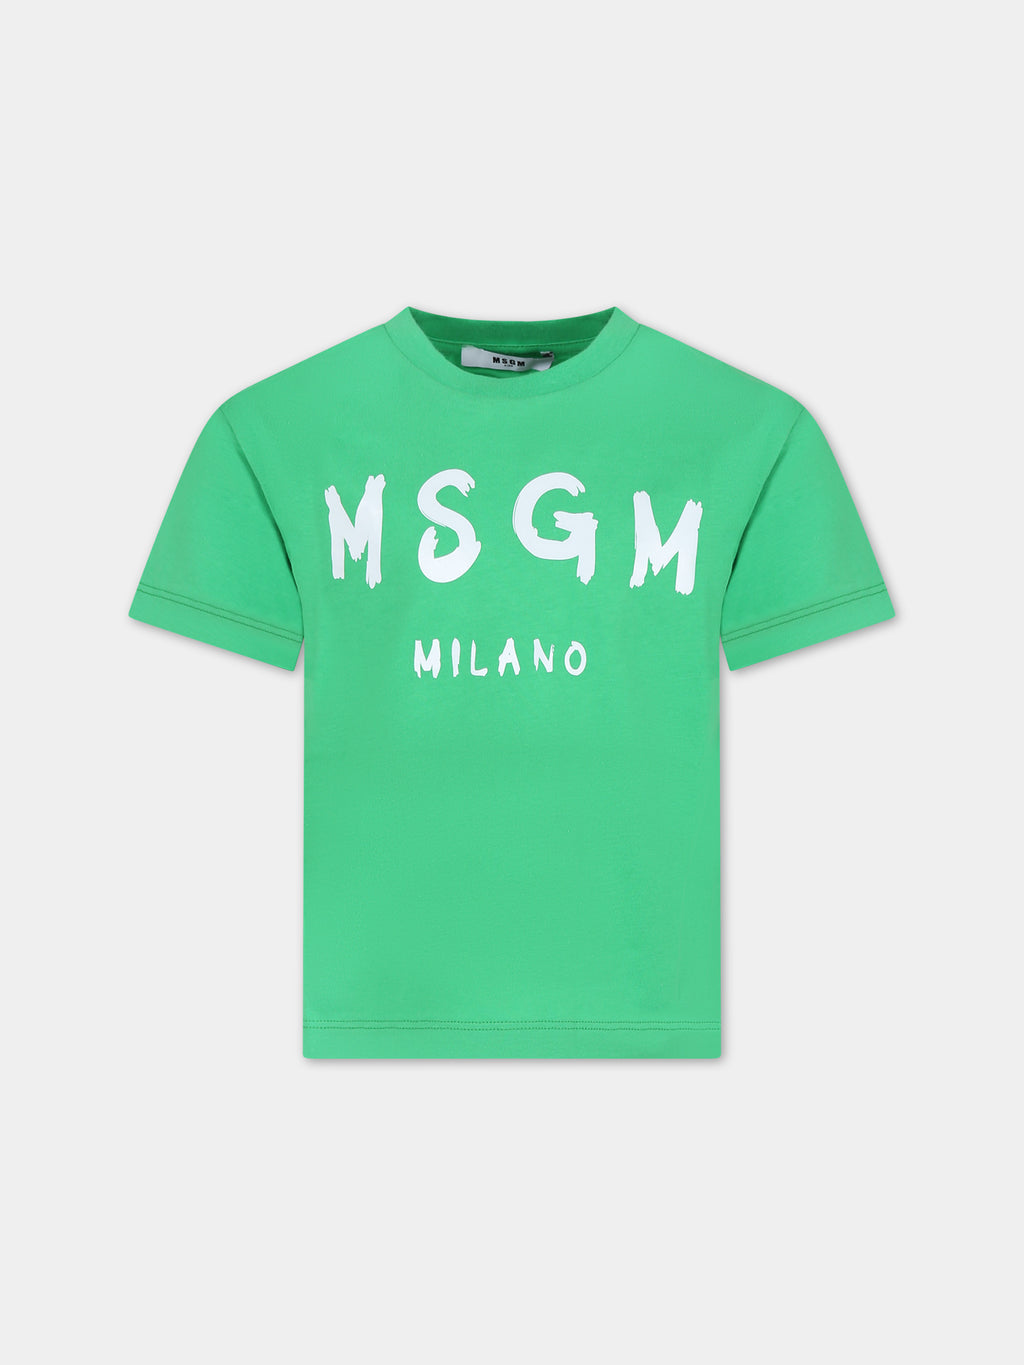 Green t-shirt for kids with logo